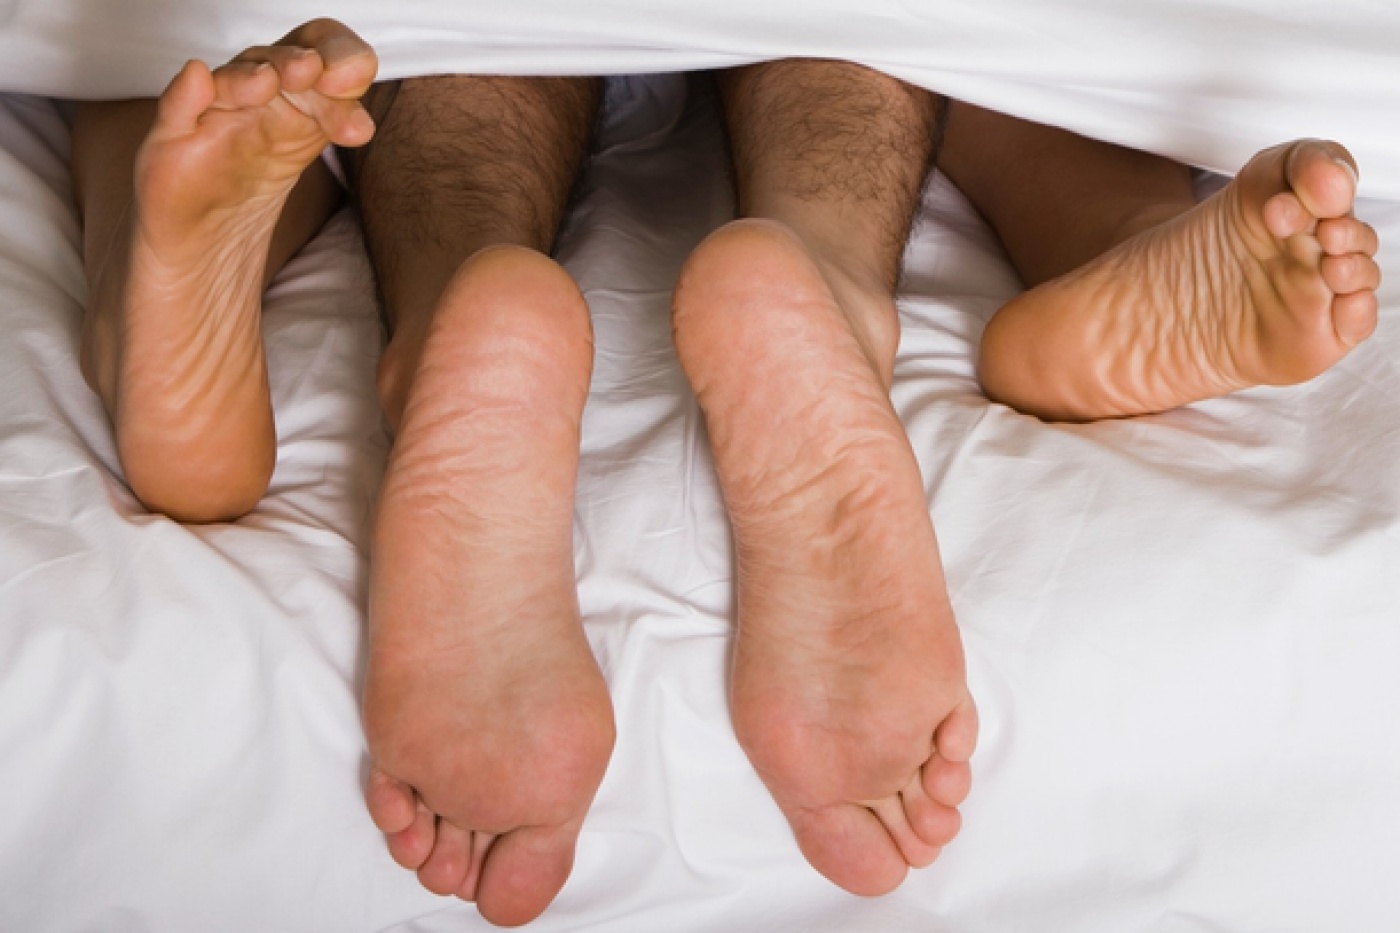 High angle view of a couple's feet under the sheets of a bed